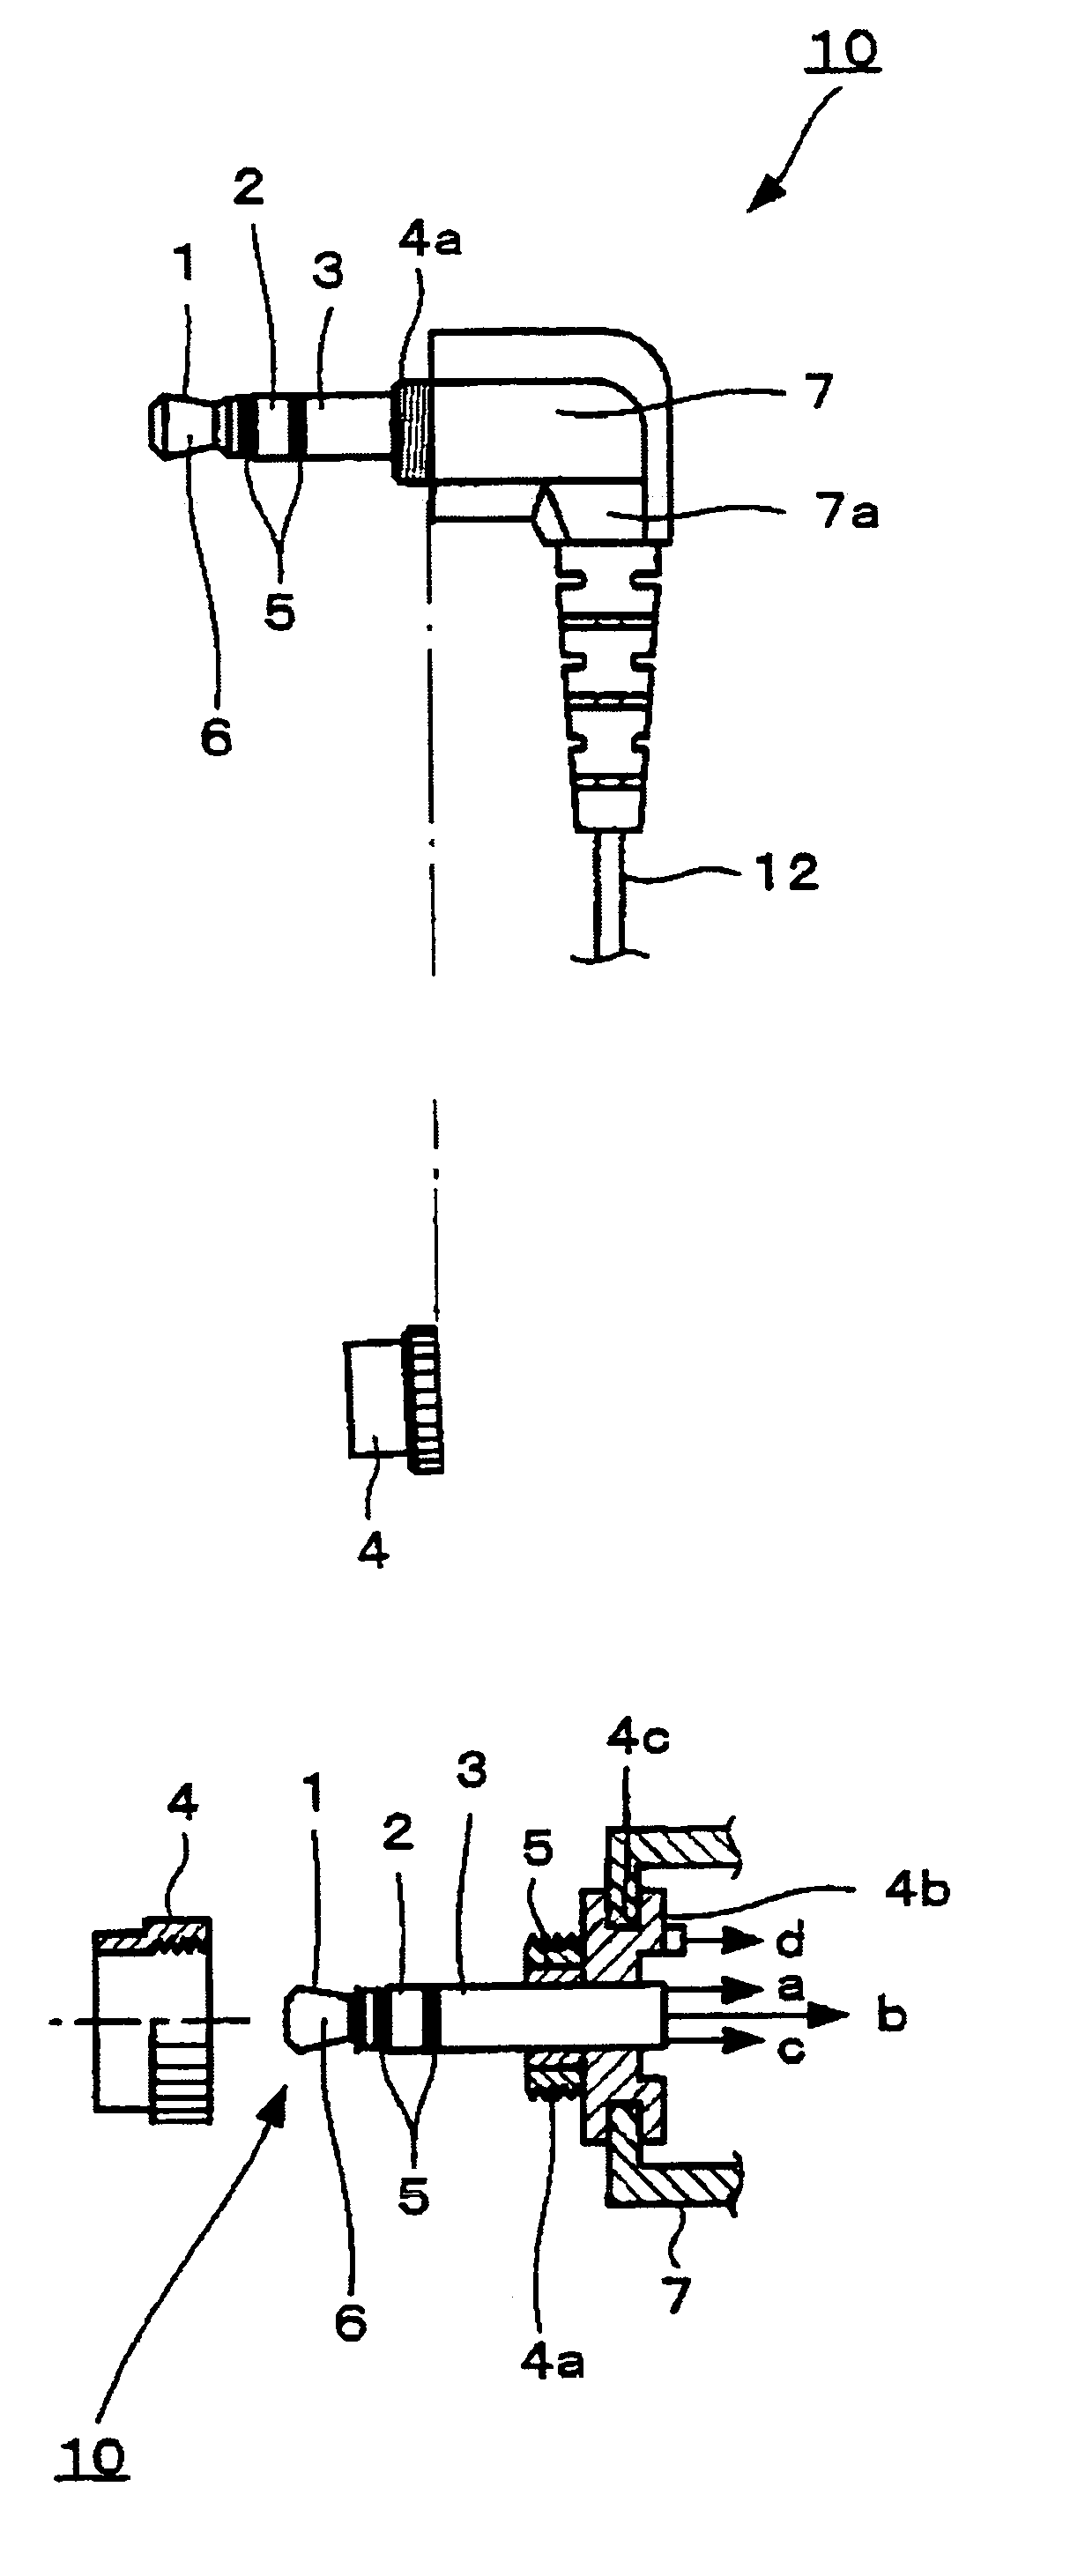 Switch-equipped input-output plug